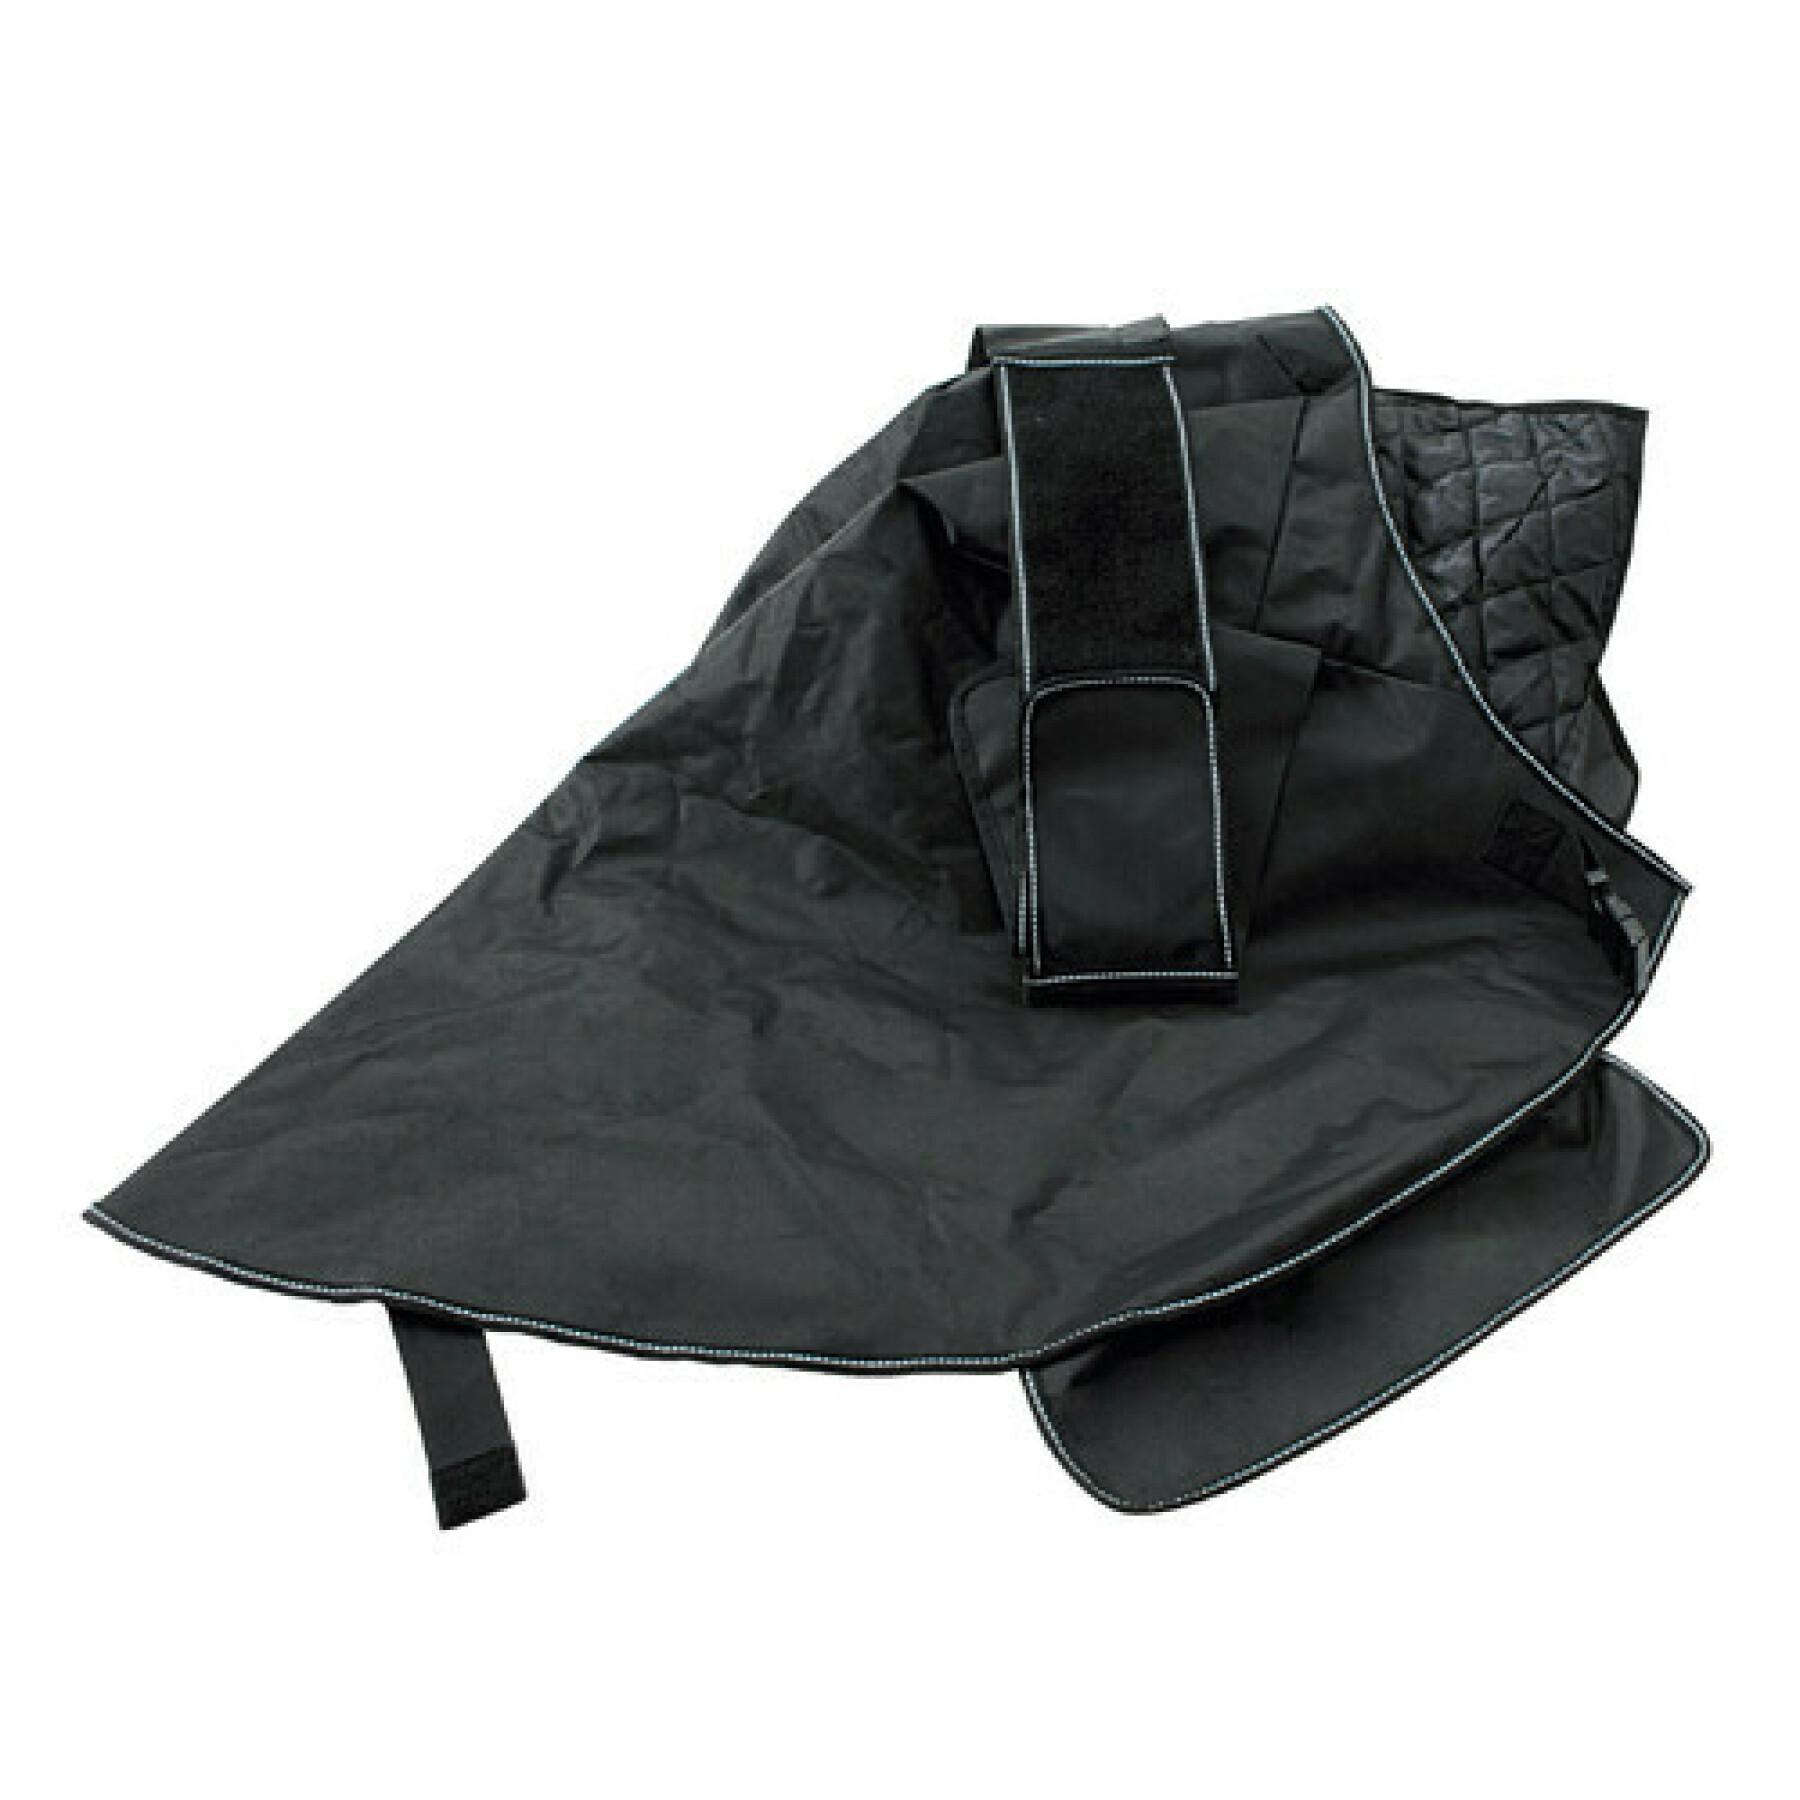 Universal motorcycle leg covers for scooters My Gear Scooter-Mate